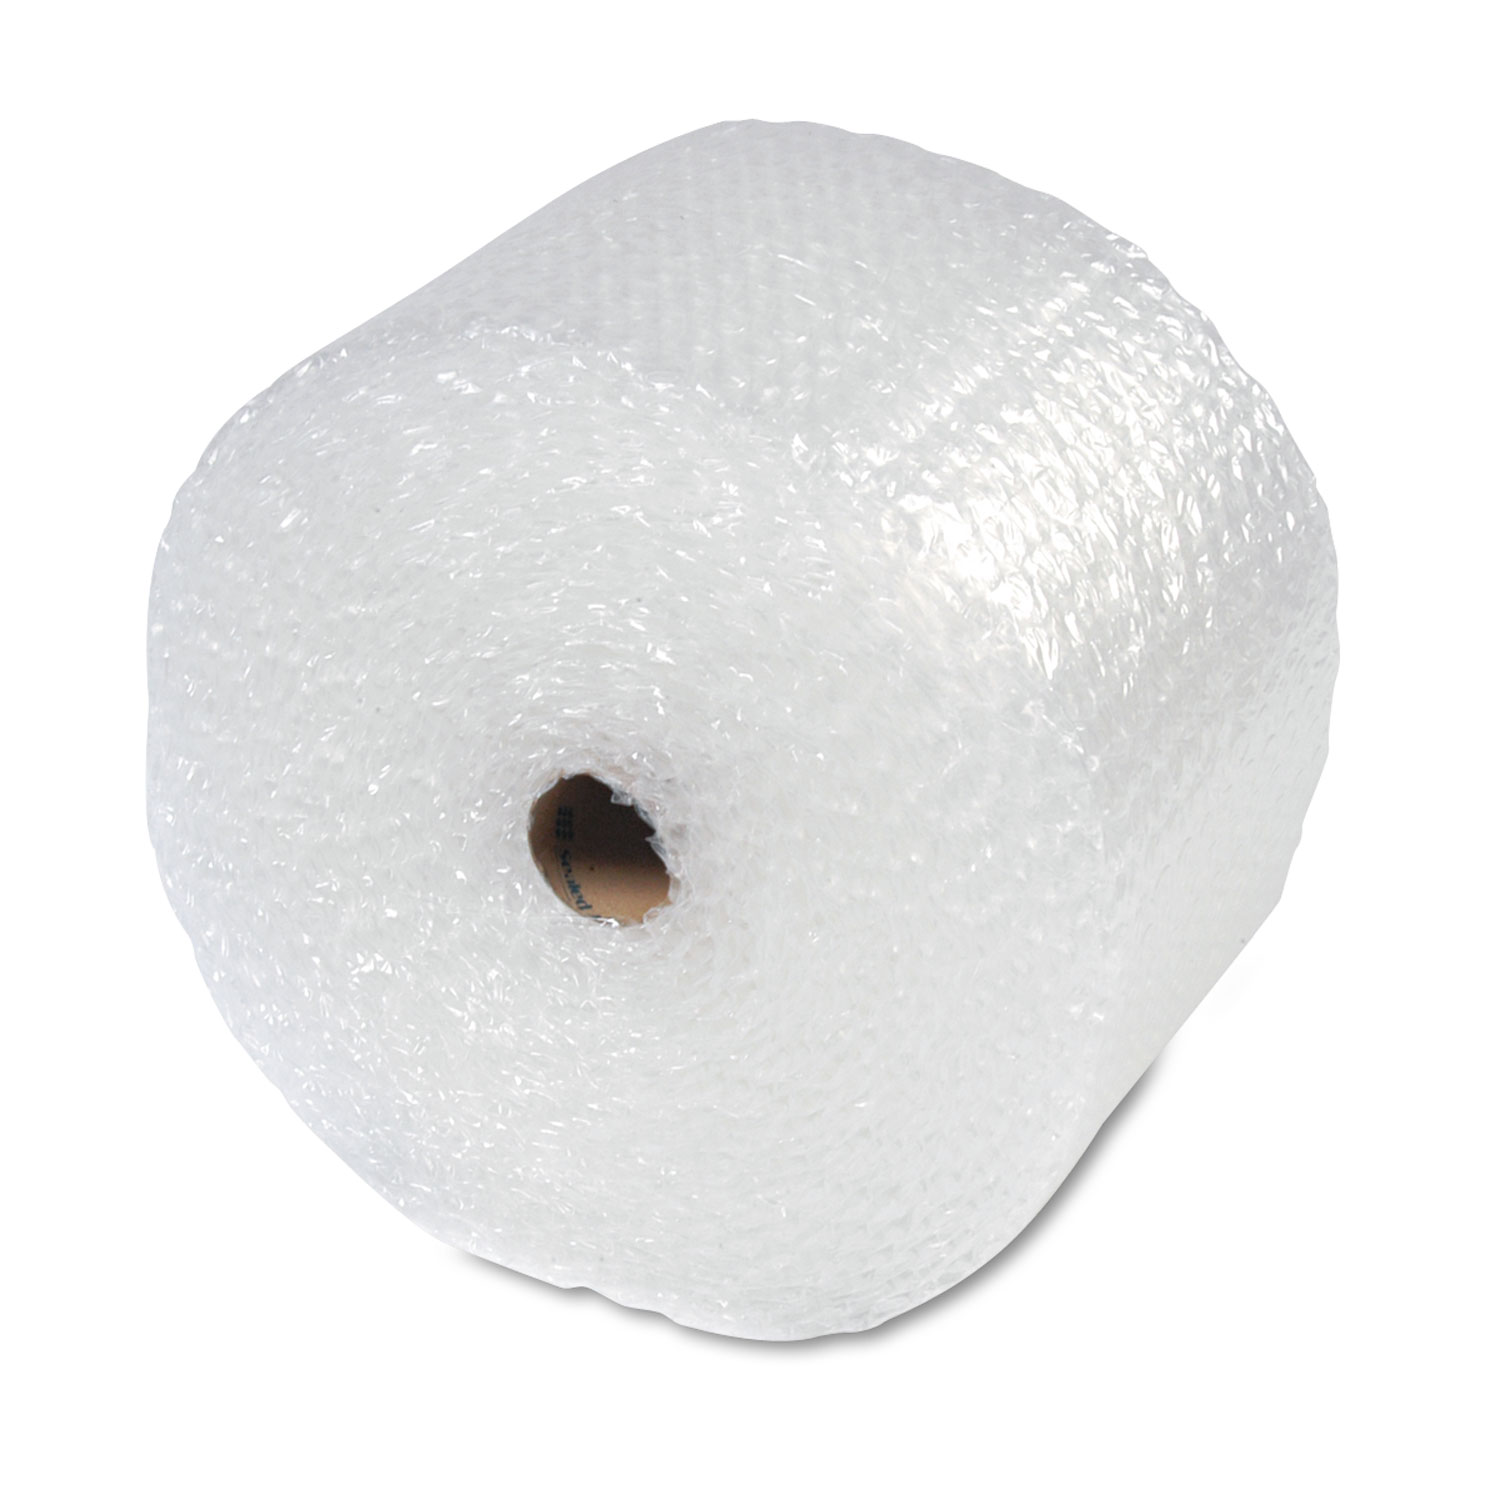 Sealed Air Bubble Wrap Cushioning Material, 5/16 Thick, 12 x 100 ft